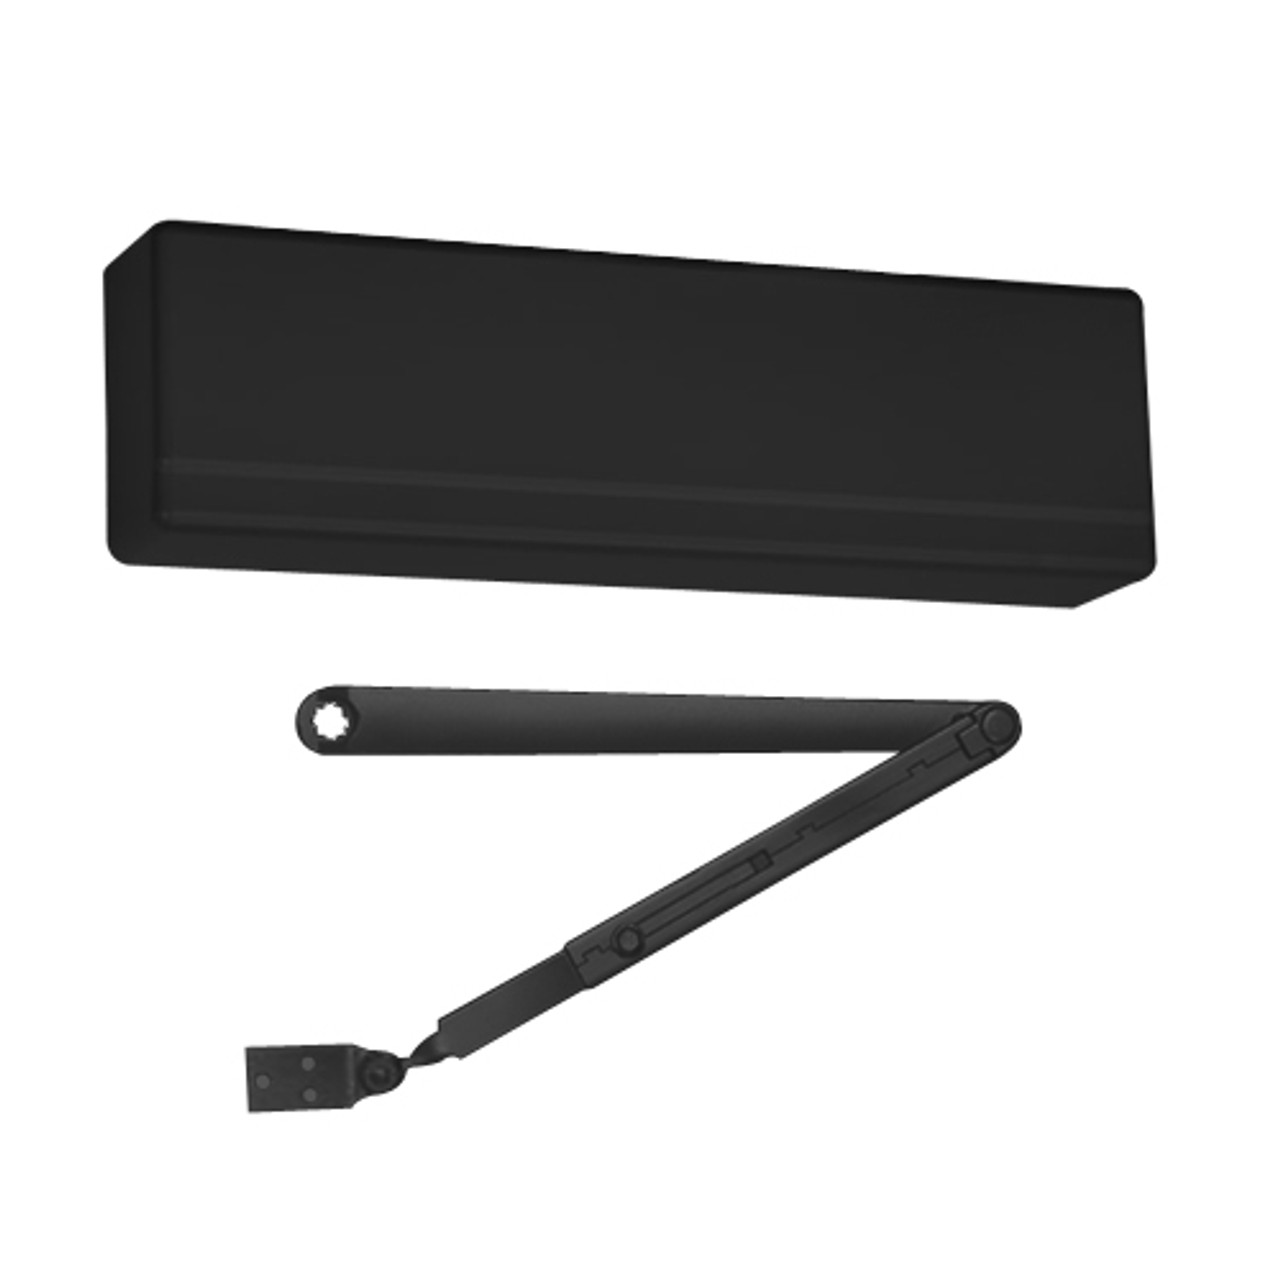 351-O8-ED Sargent 351 Series Powerglide Door Closer with Regular Duty Mortise Foot Arm in Black Powder Coat